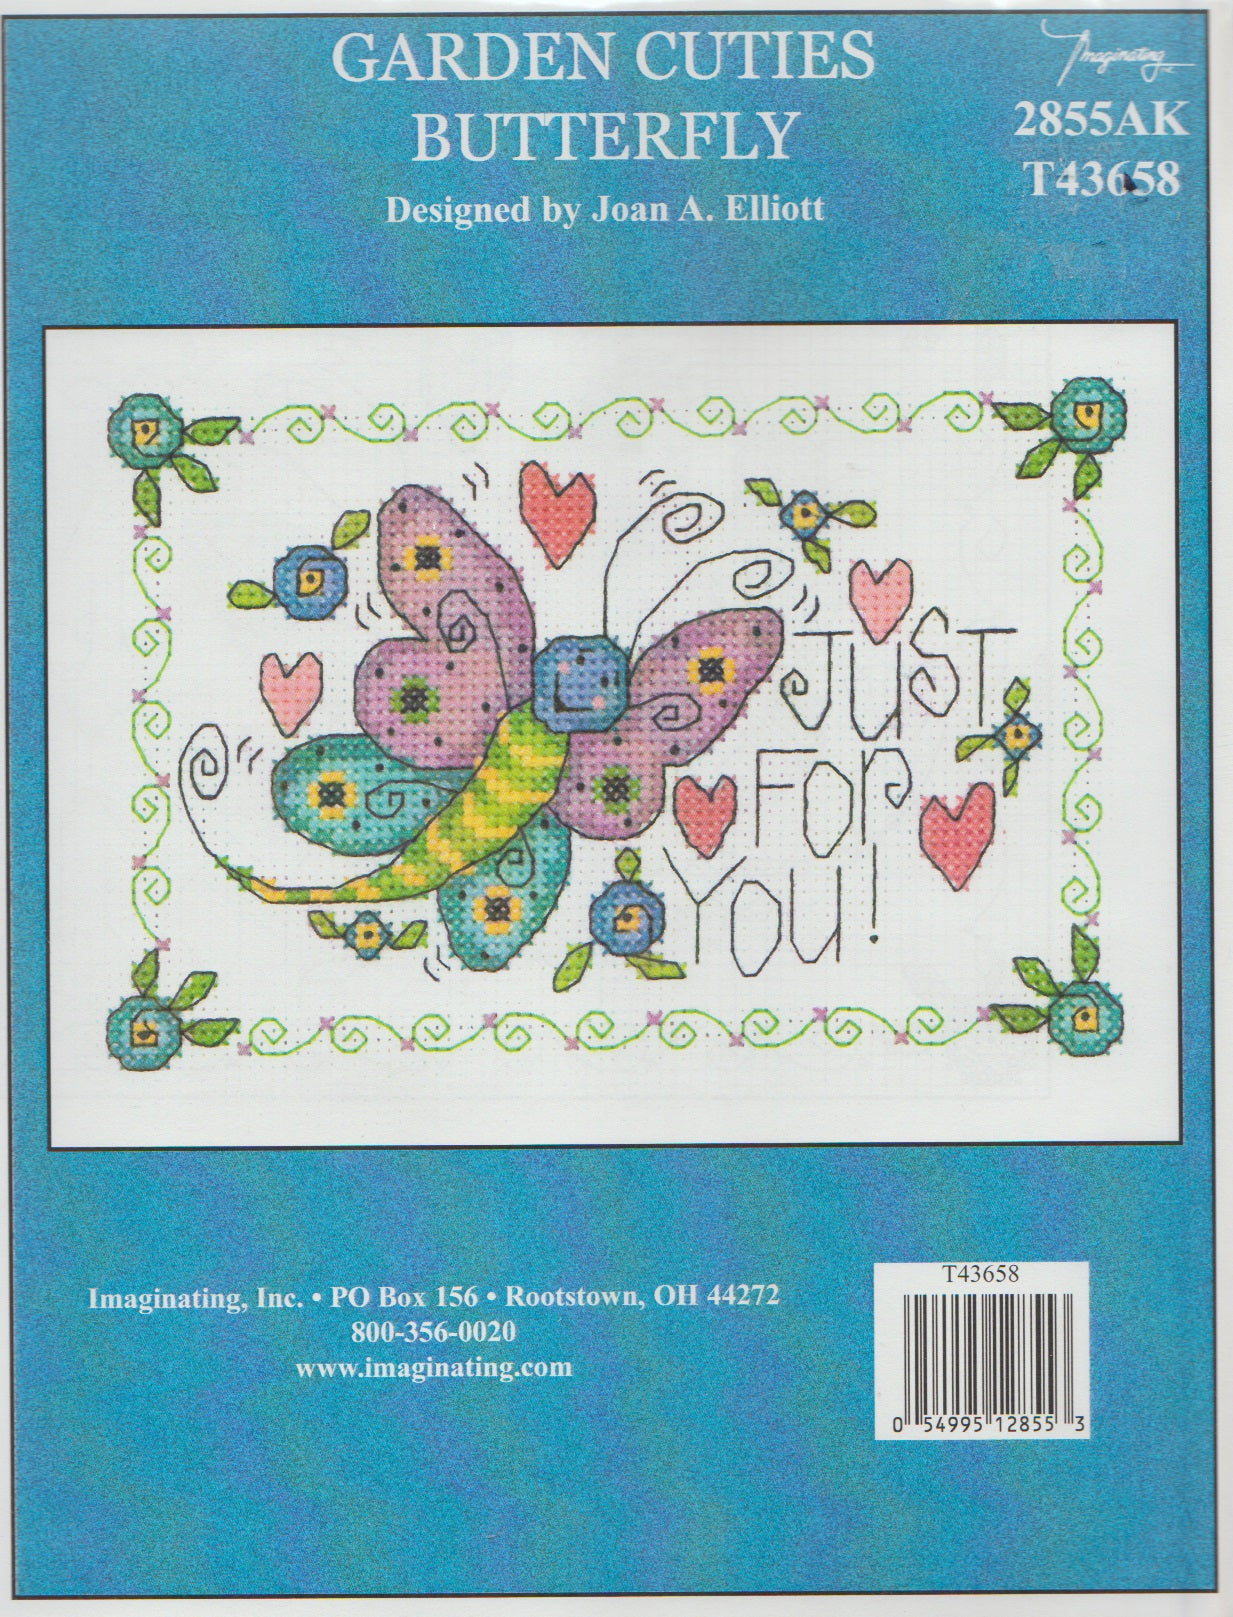 Imaginating Just For You 2855AK cross stitch kit